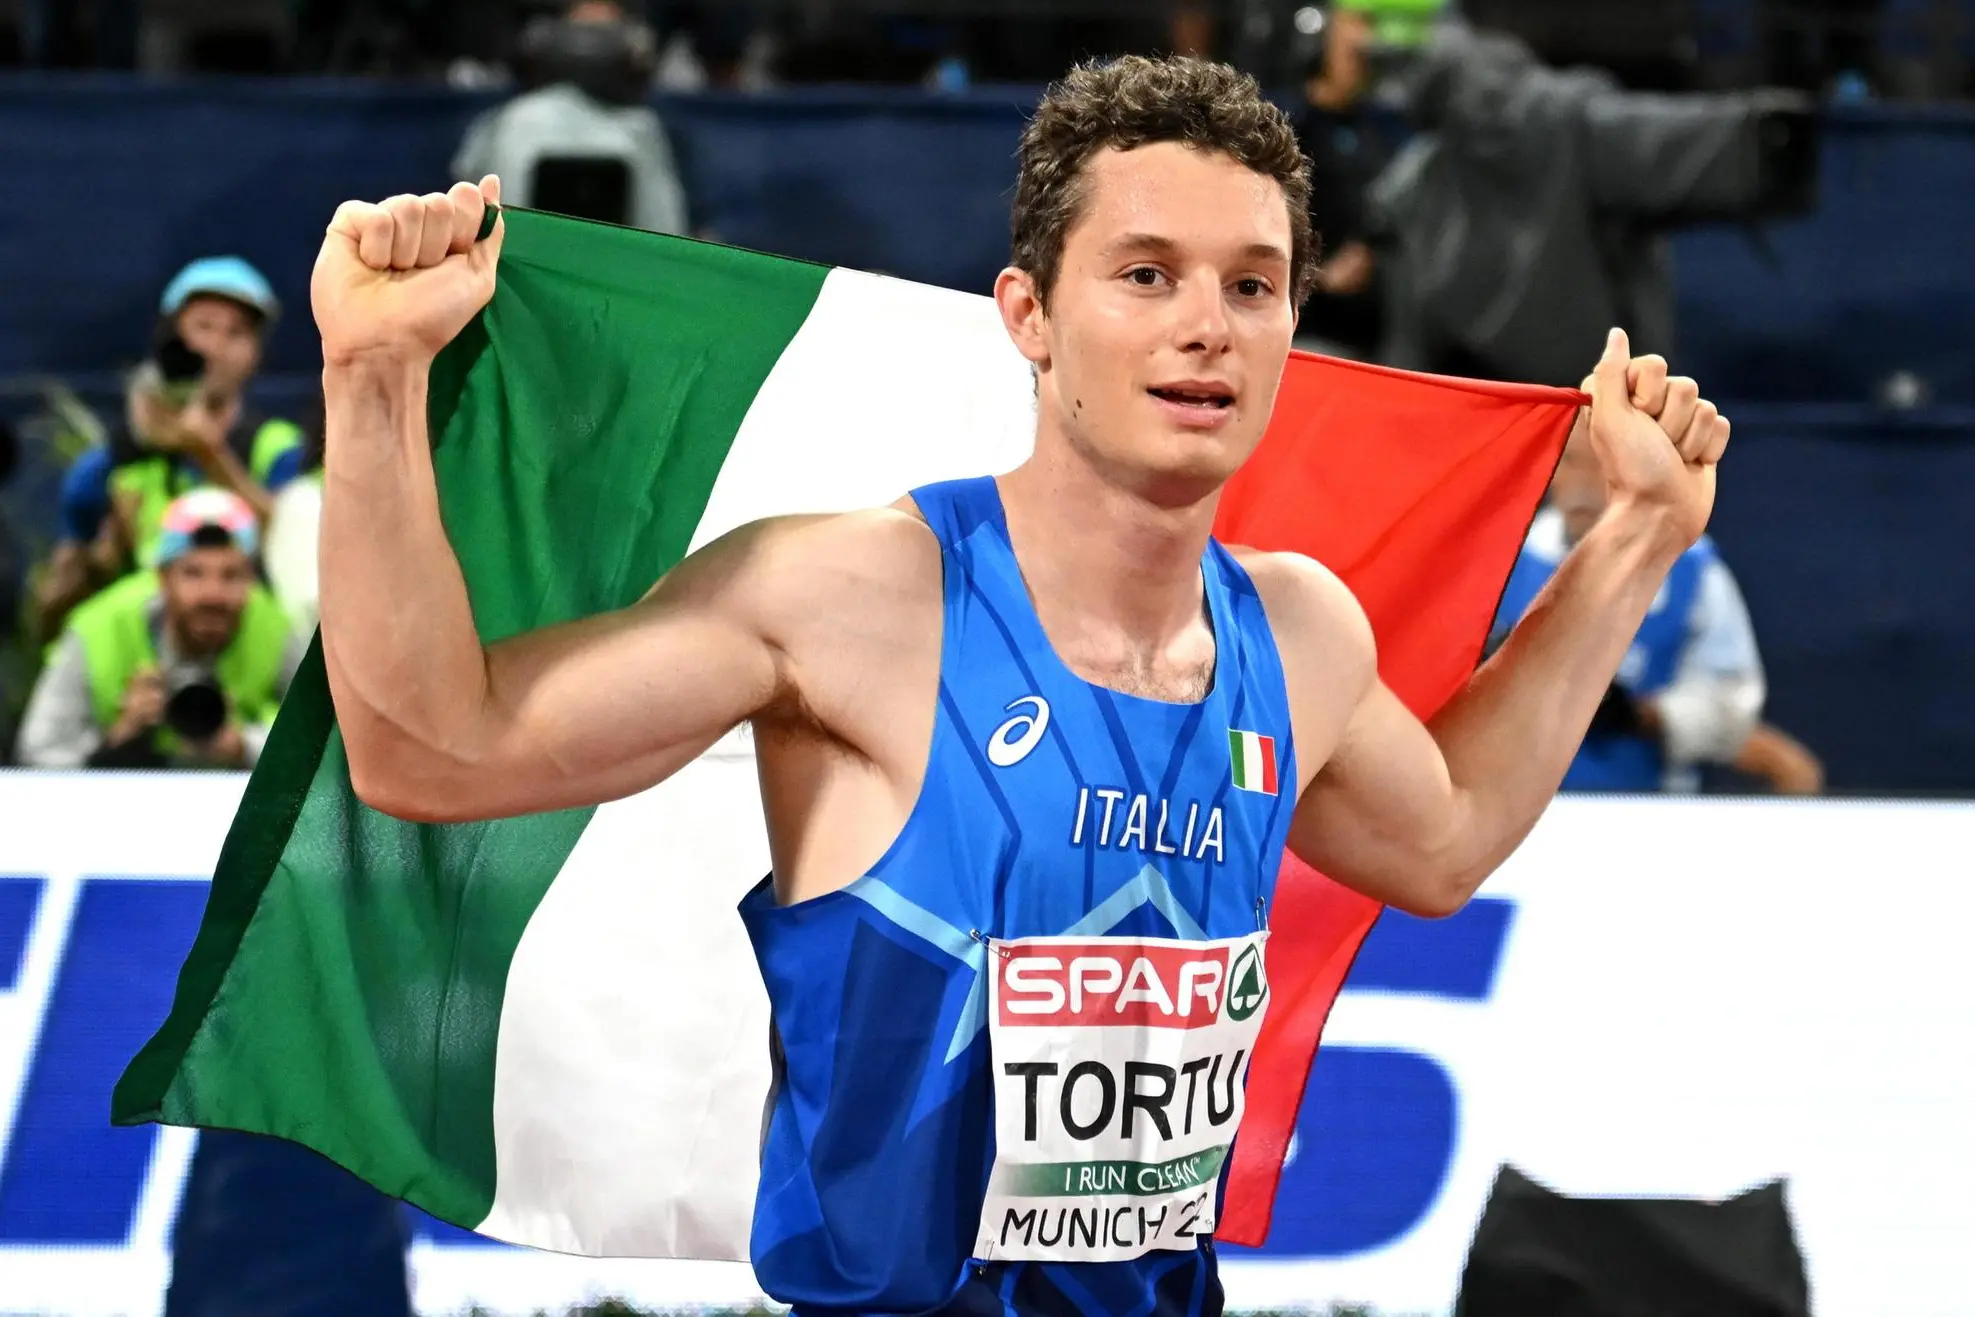 epa10129700 Filippo Tortu of Italy celebrates after placing third in the men's 200m final during the Athletics events at the European Championships Munich 2022, Munich, Germany, 19 August 2022. The championships will feature nine Olympic sports, Athletics, Beach Volleyball, Canoe Sprint, Cycling, Artistic Gymnastics, Rowing, Sport Climbing, Table Tennis and Triathlon. EPA/CHRISTIAN BRUNA